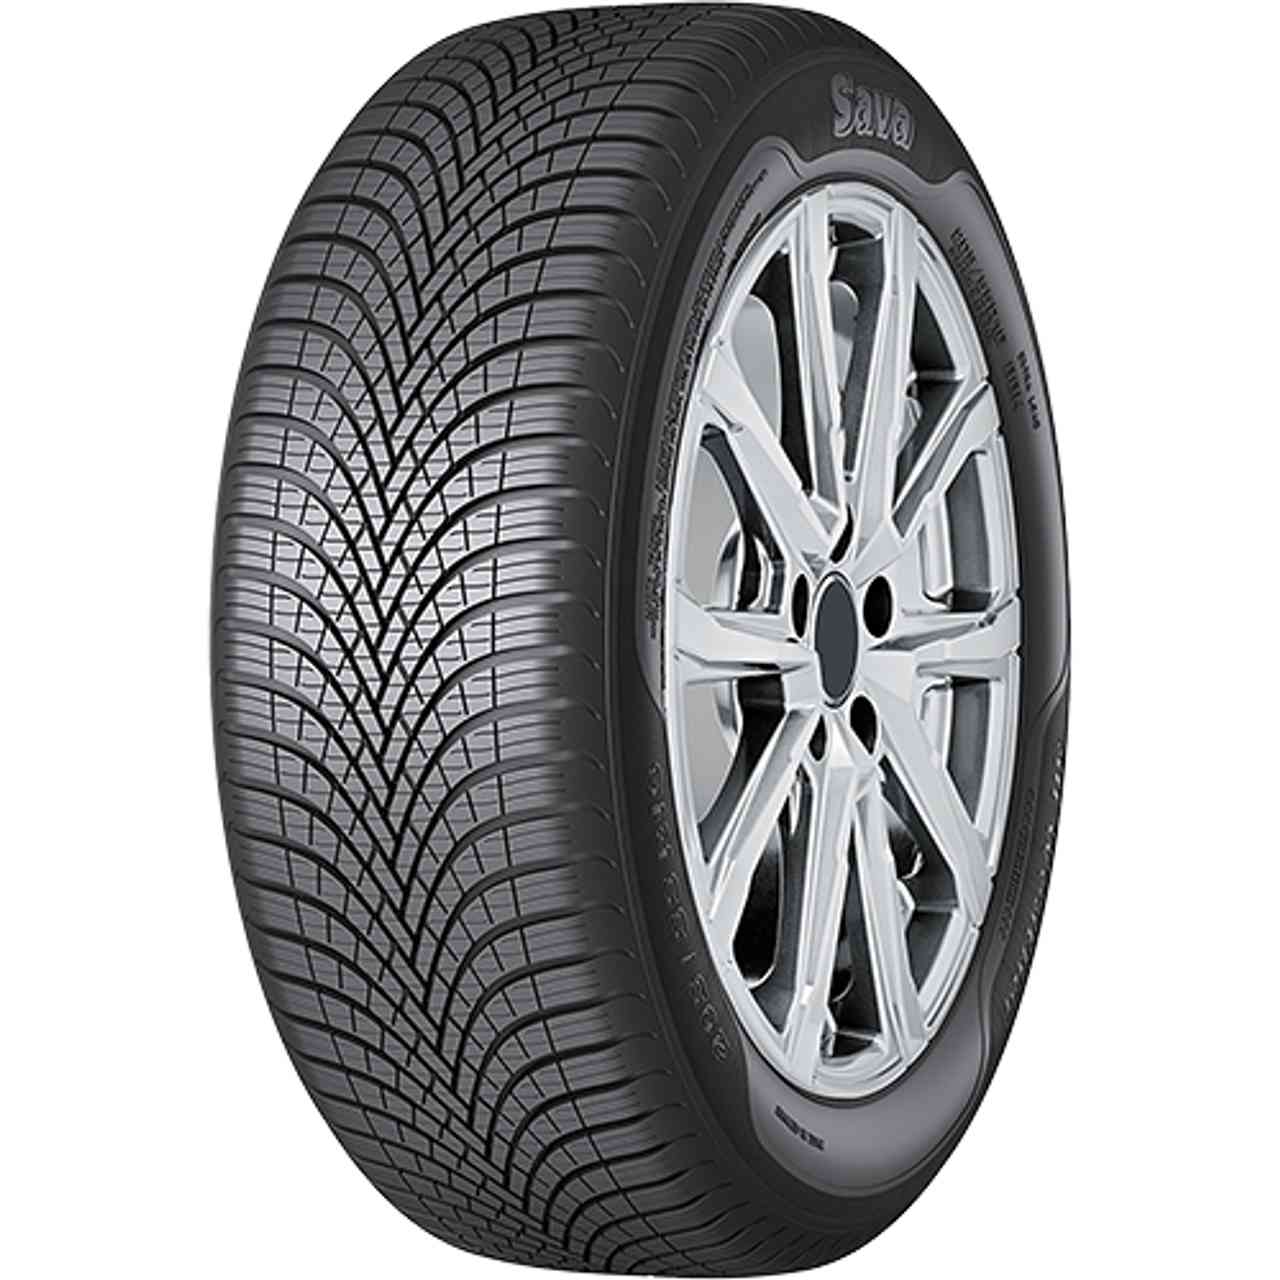 SAVA ALL WEATHER 235/65R17 108V BSW